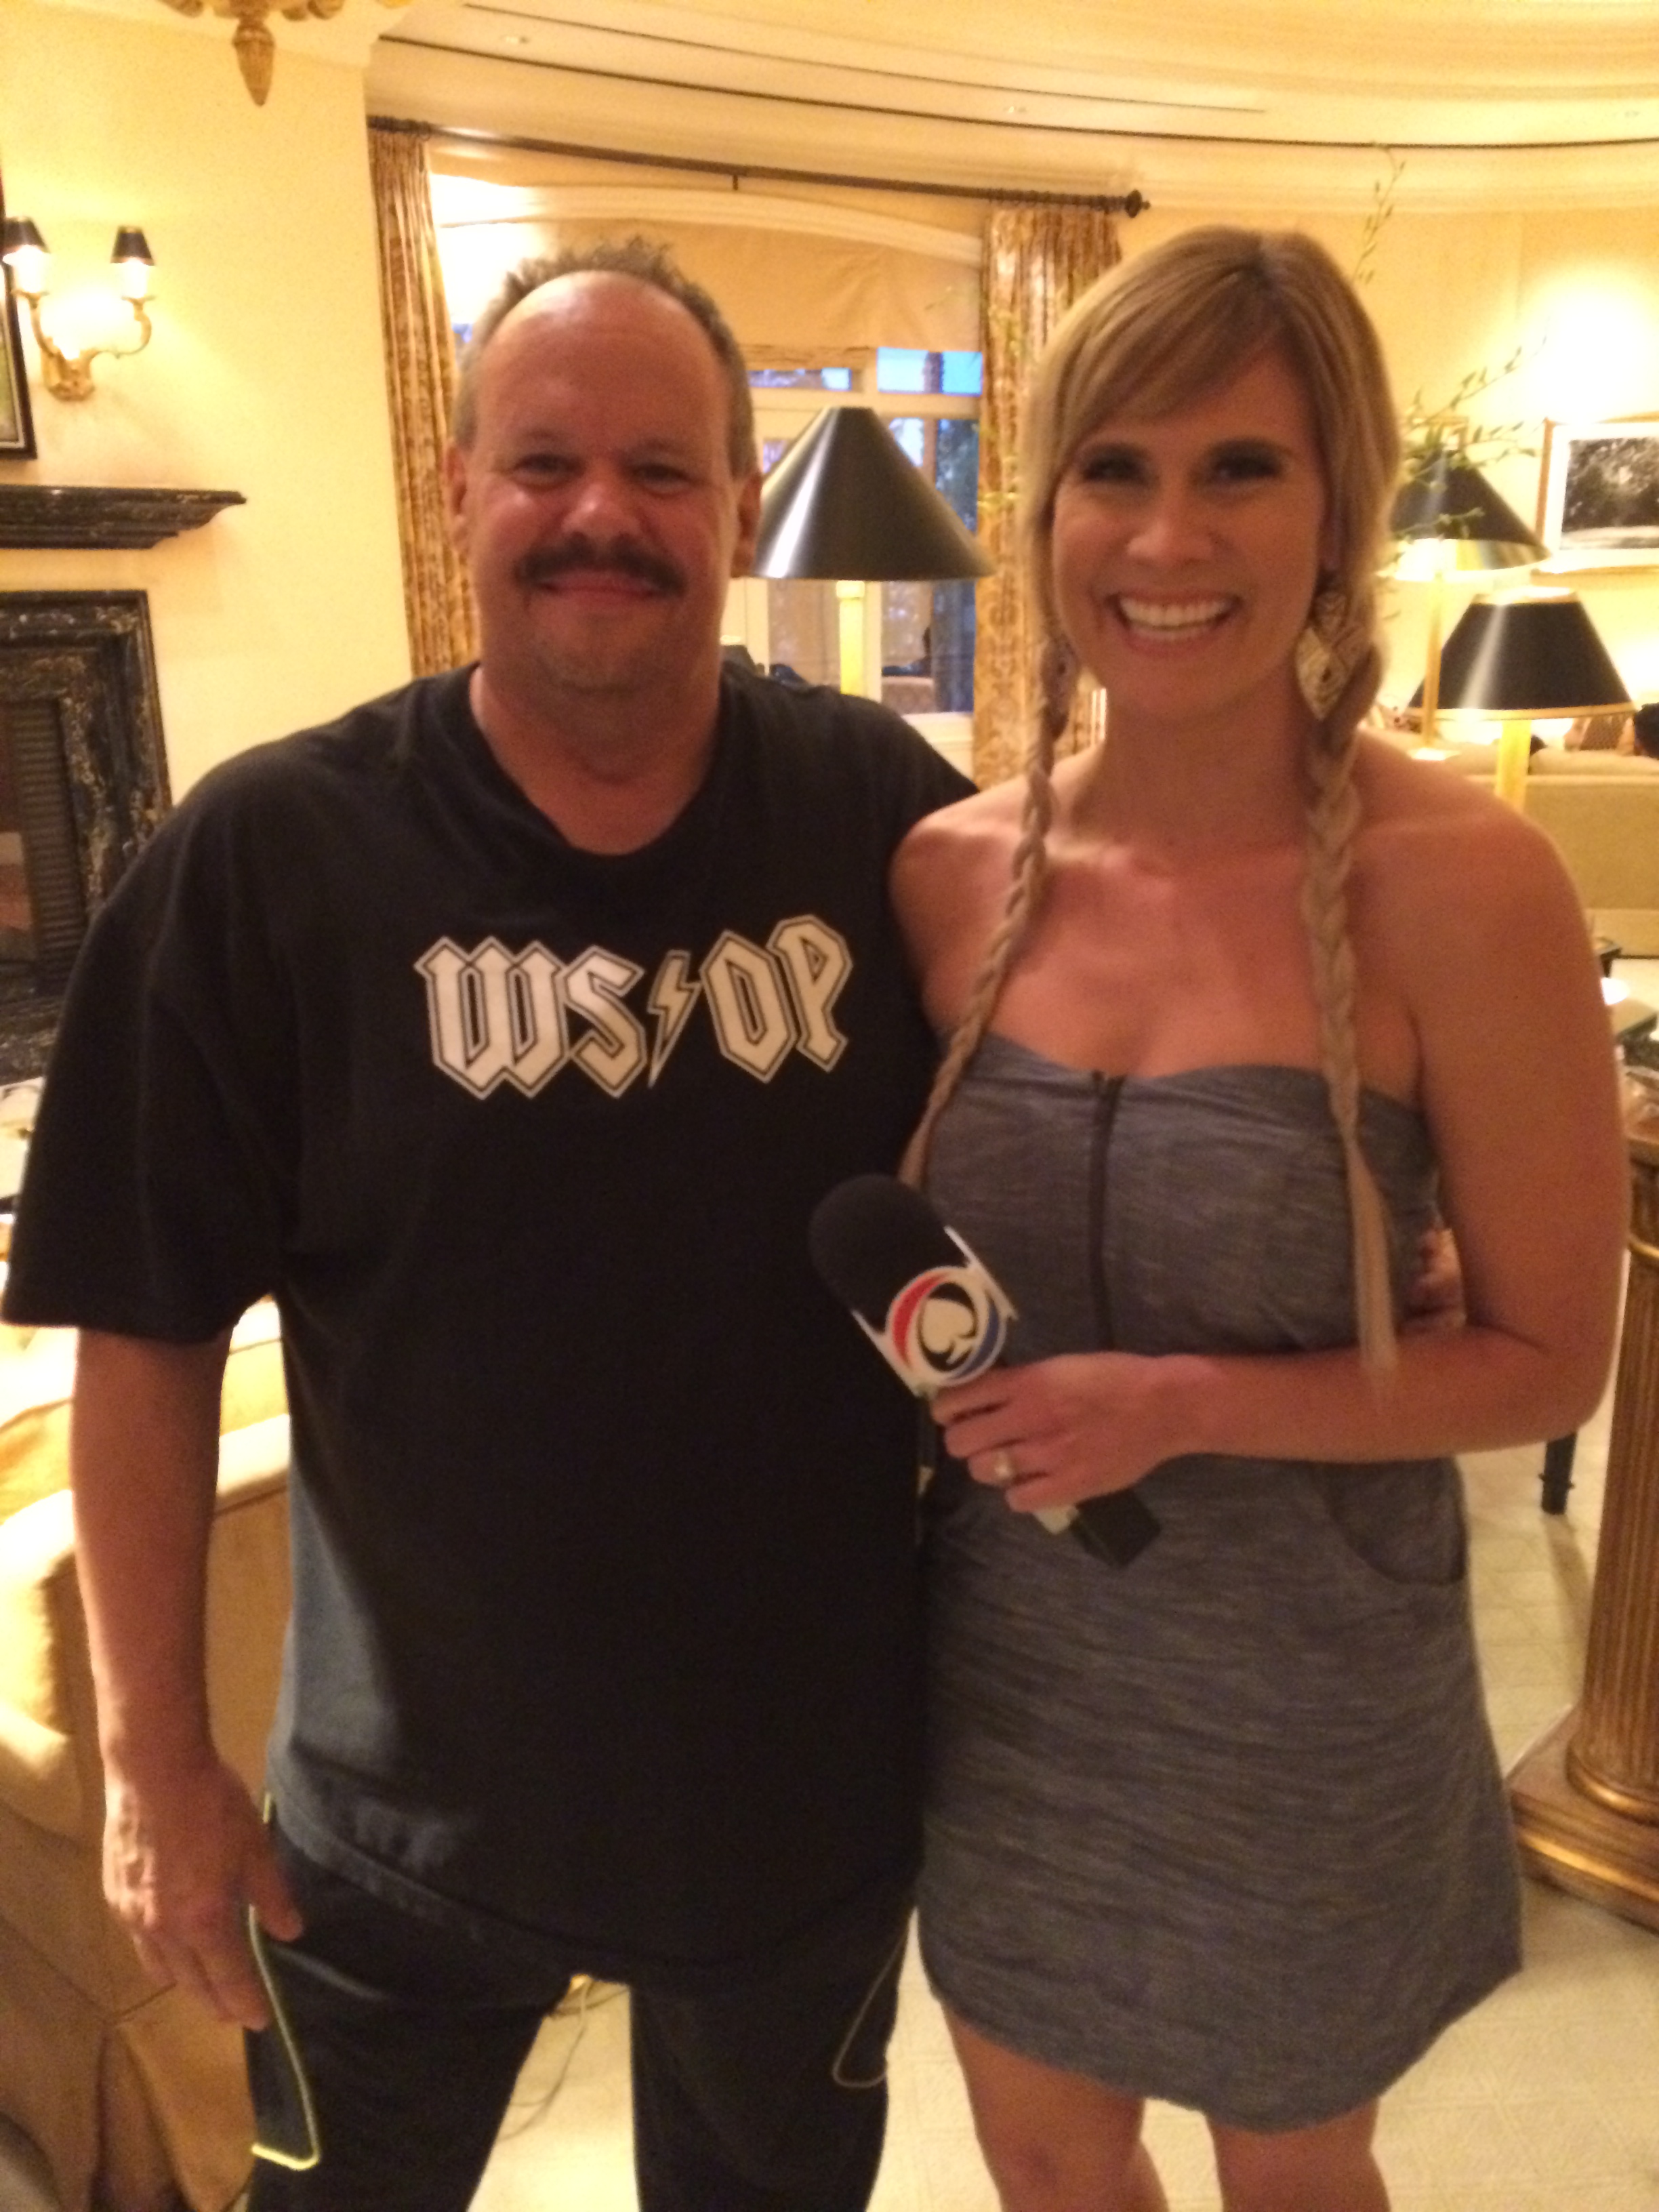 Being interviewed by Poker News reporter Sarah Grant at 2015 WSOP